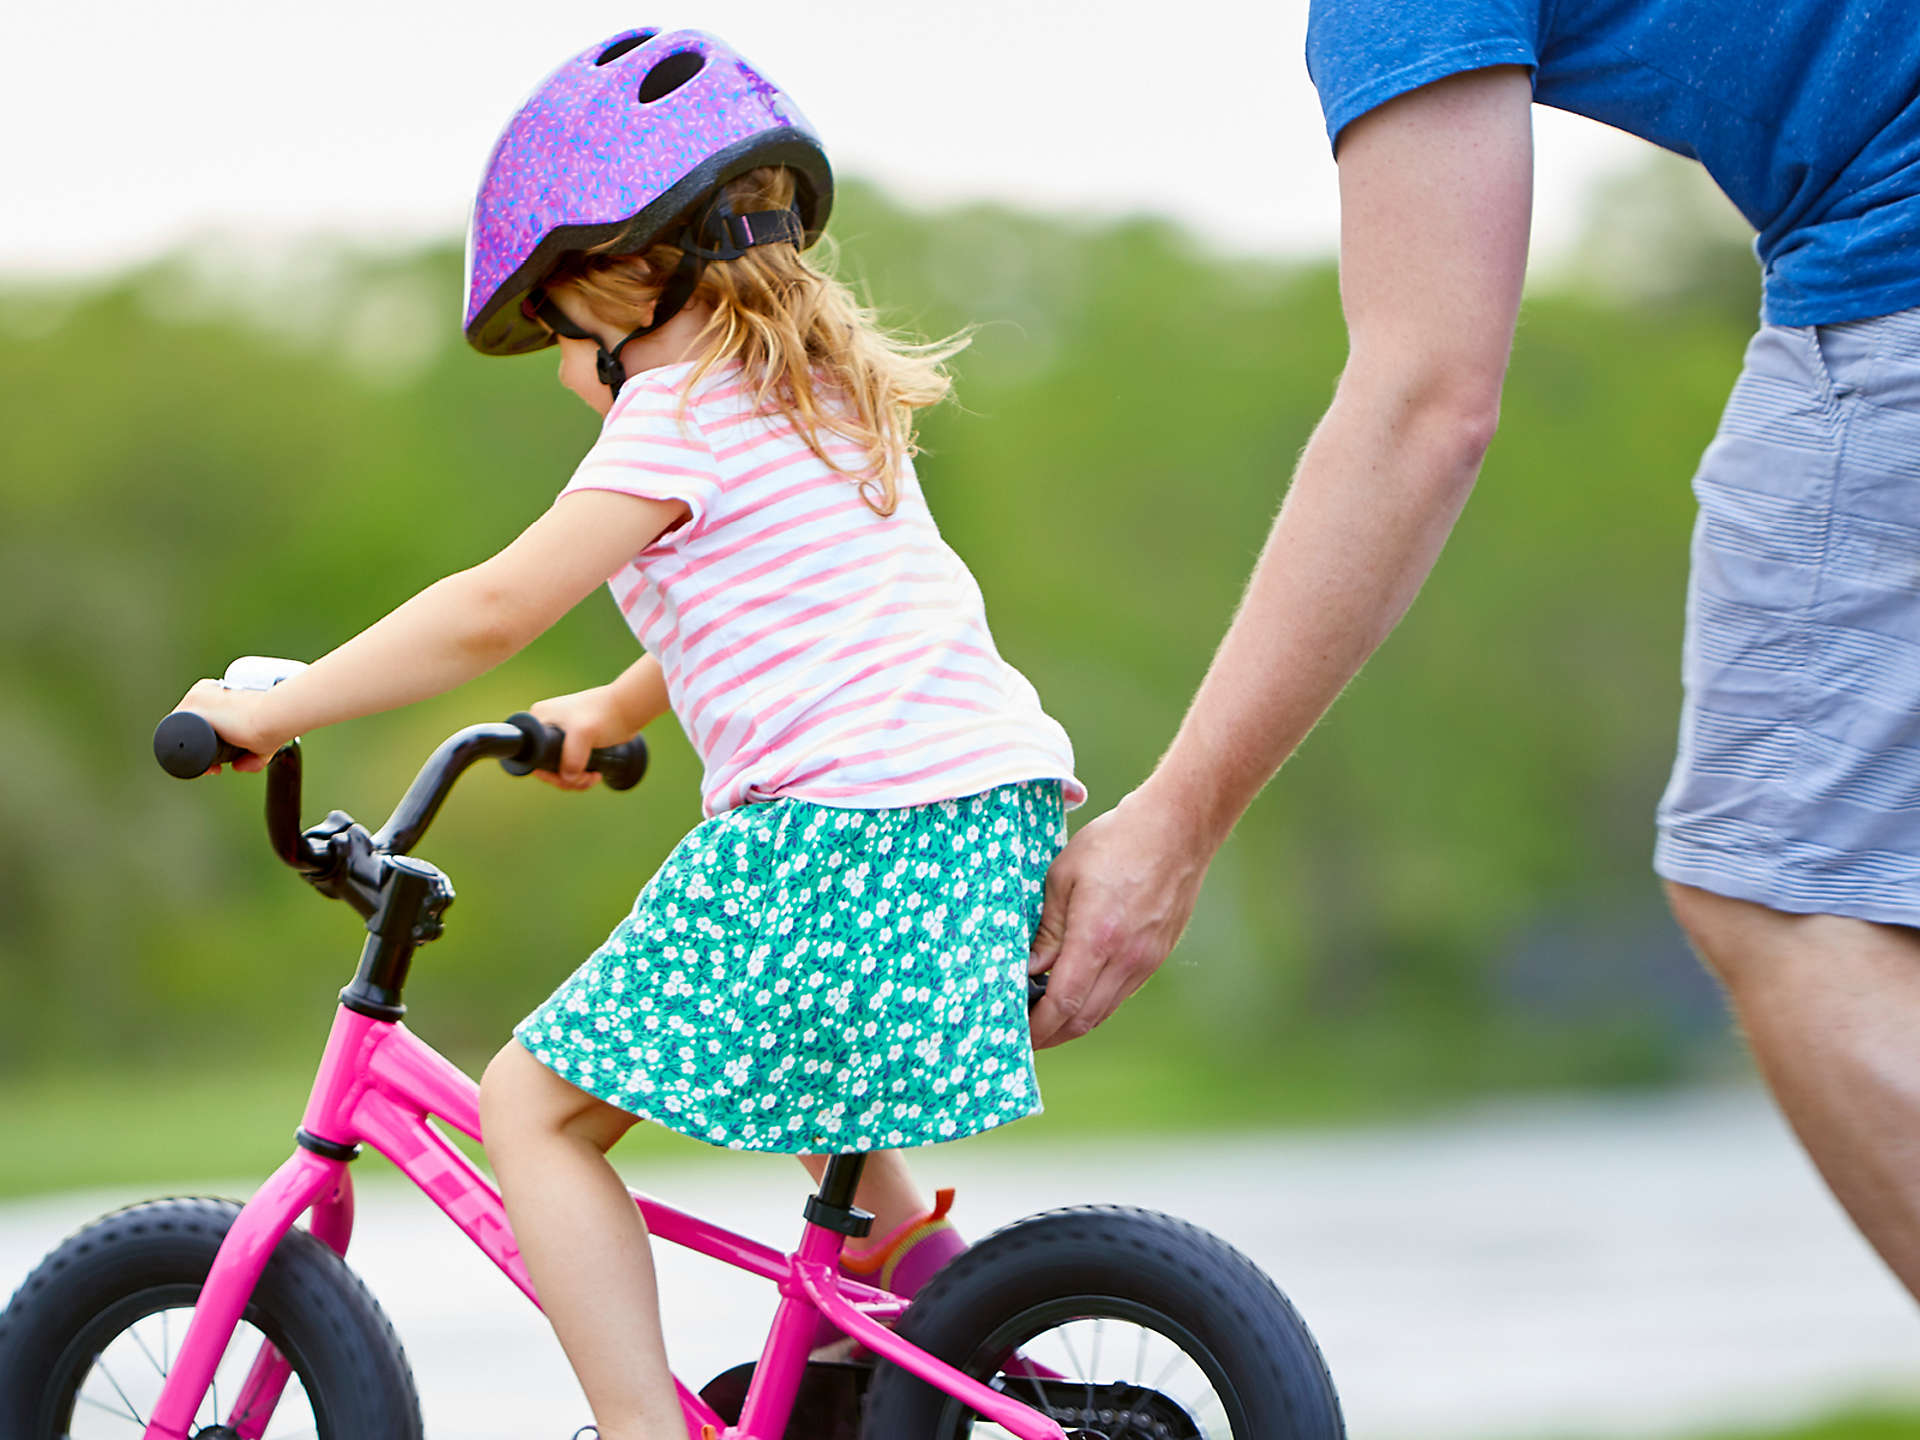 Trek dials in new Precaliber lineup with four bikes to fit kids ages 3-12